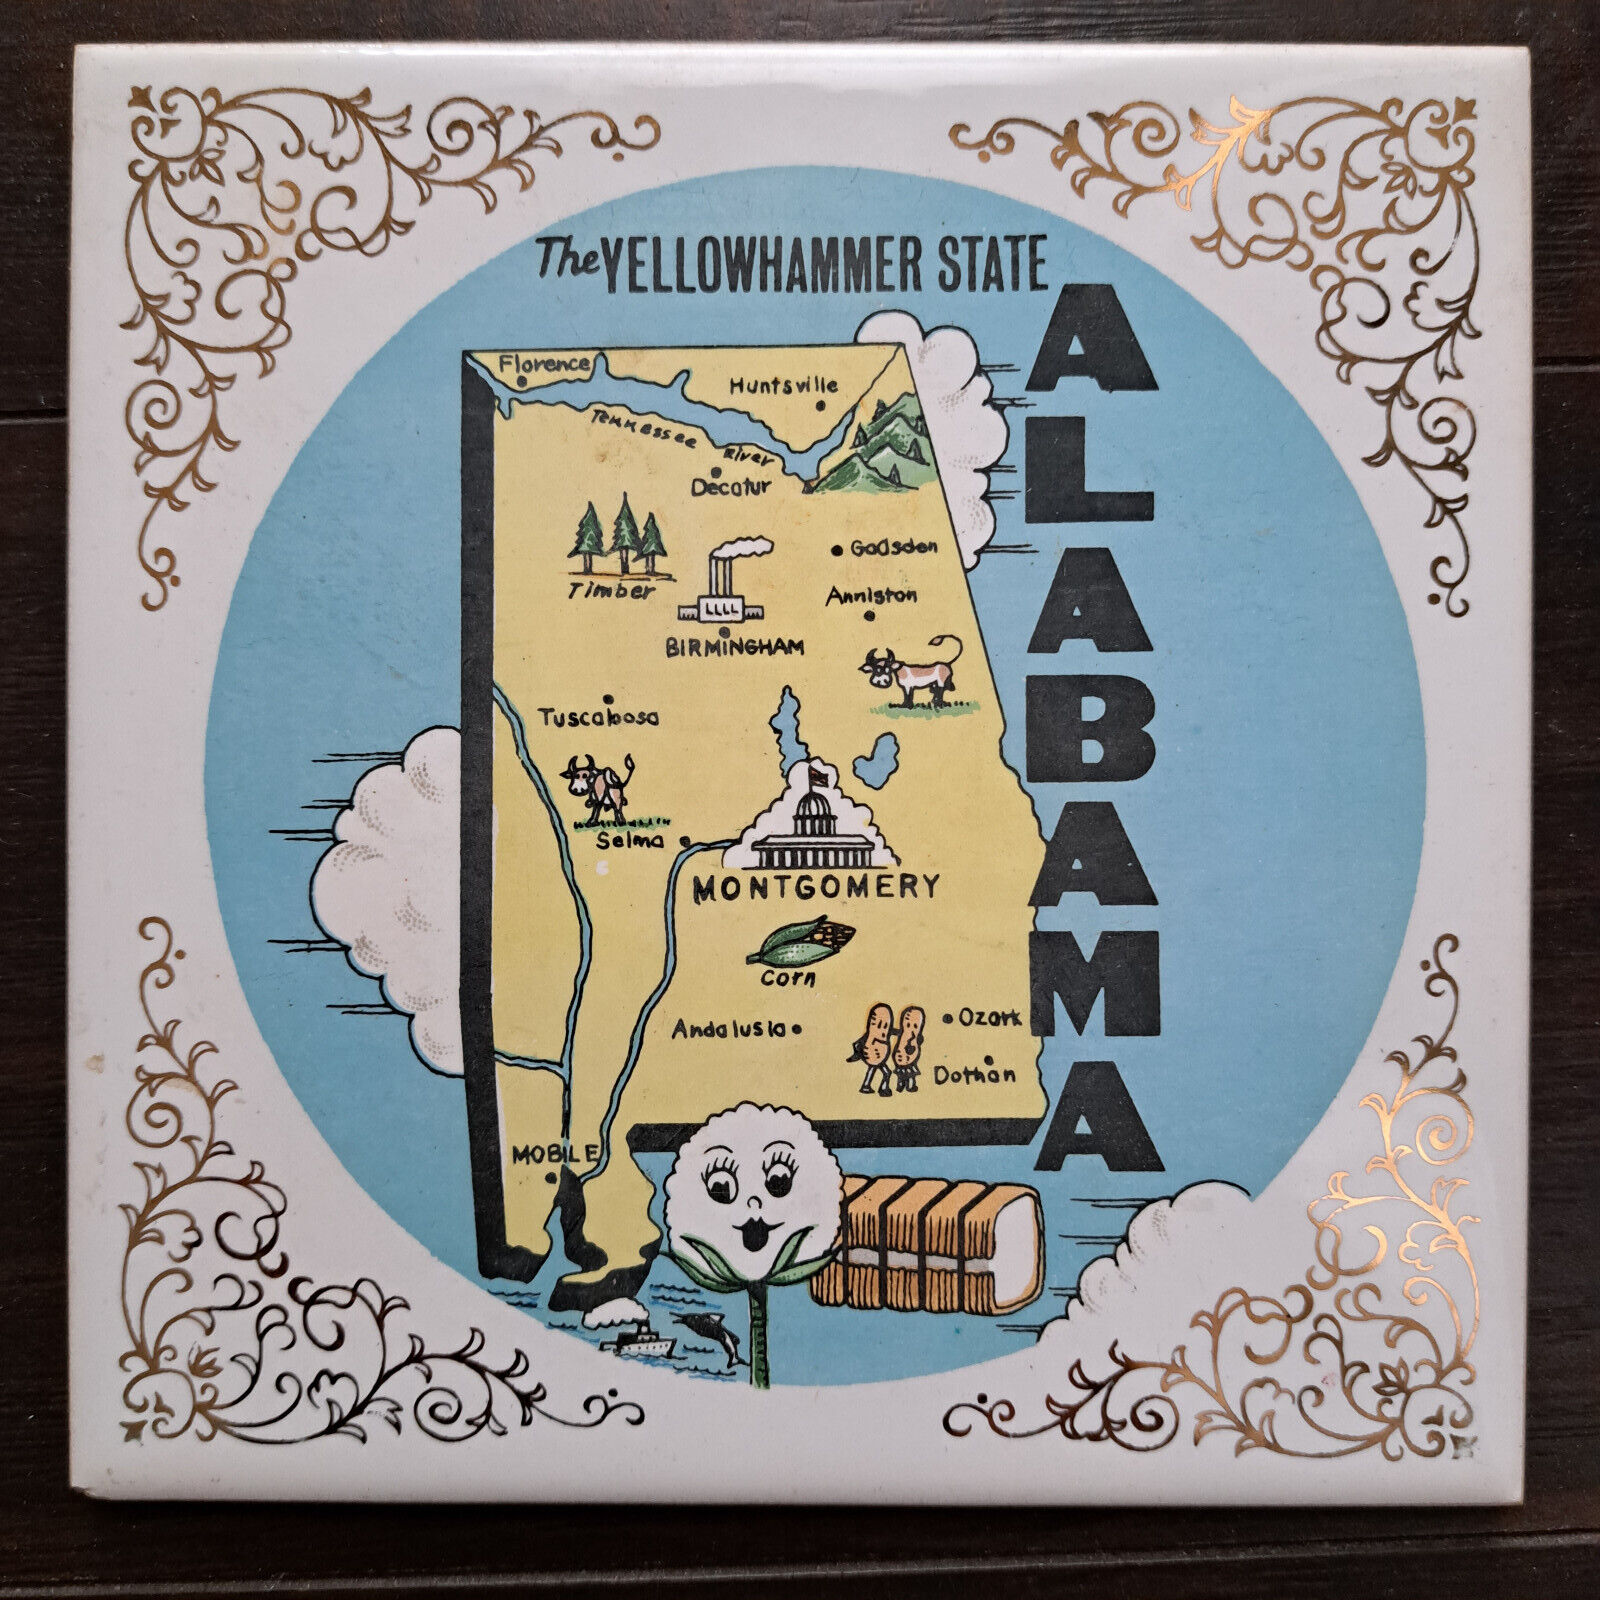 Alabama, The Yellowhammer State ||| Vintage Designer Ceramic Tile by Dixie